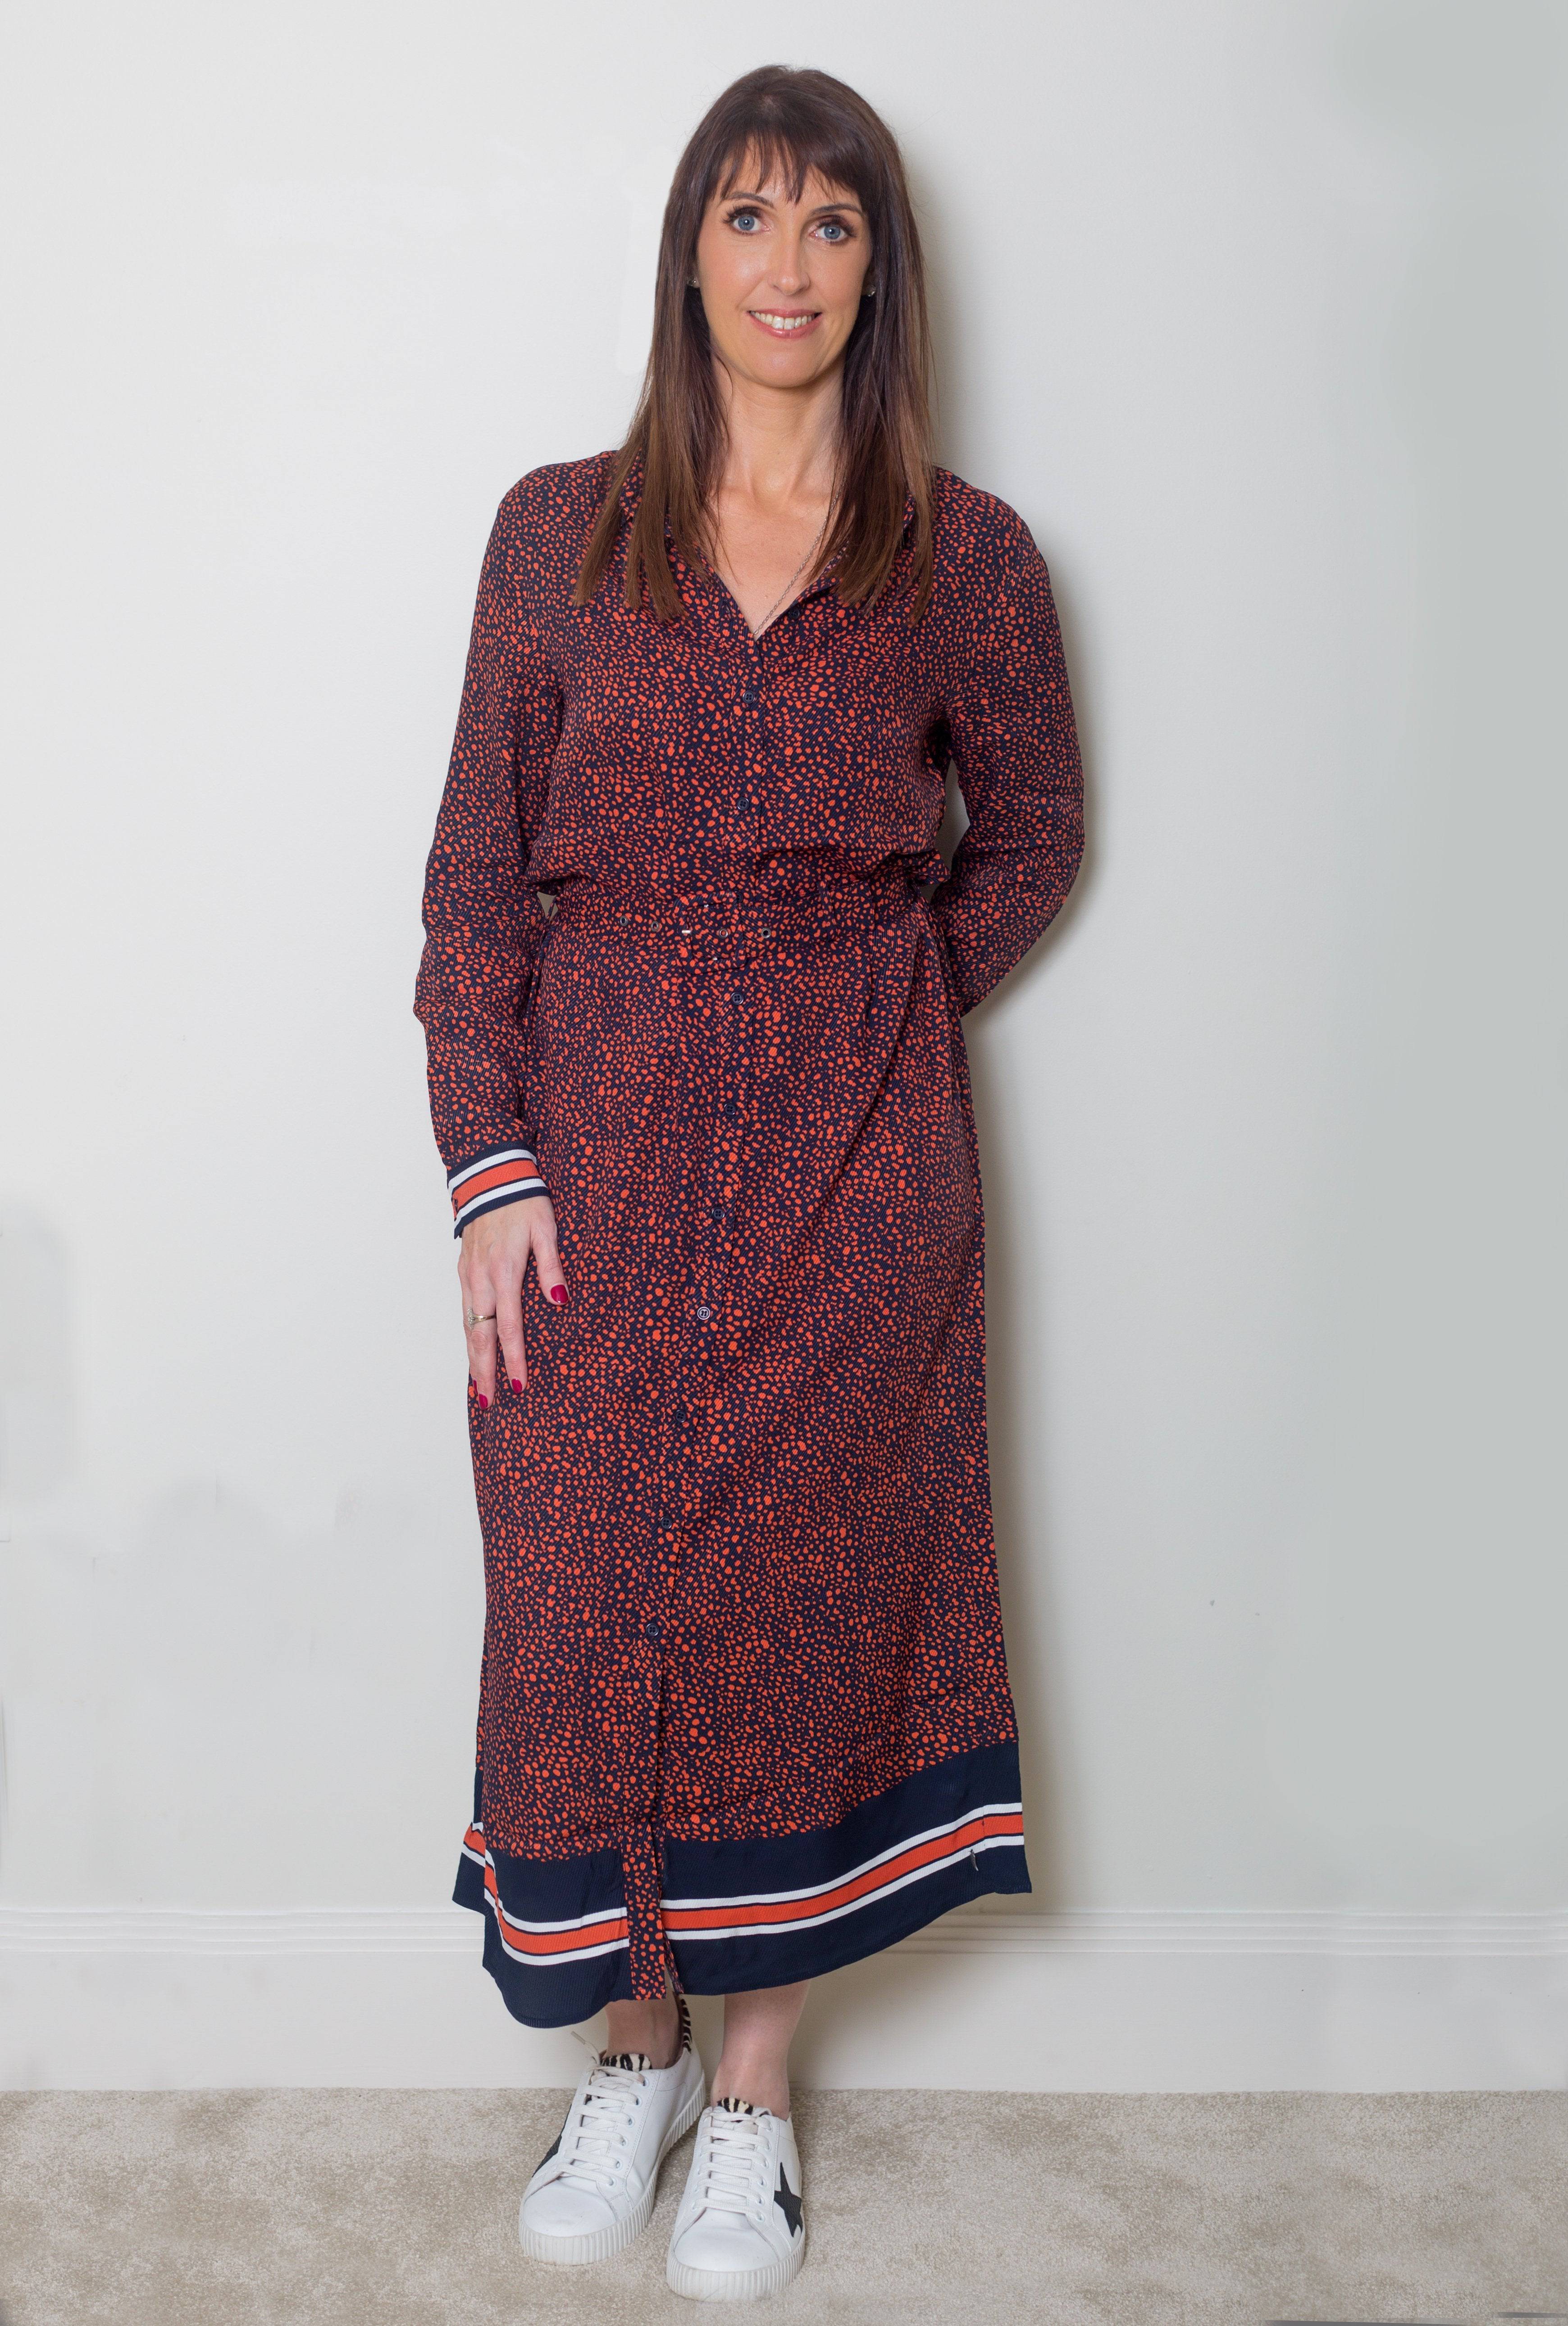 Coster Copenhagen Long Shirt Dress in Rain Print - Your Style Your Story